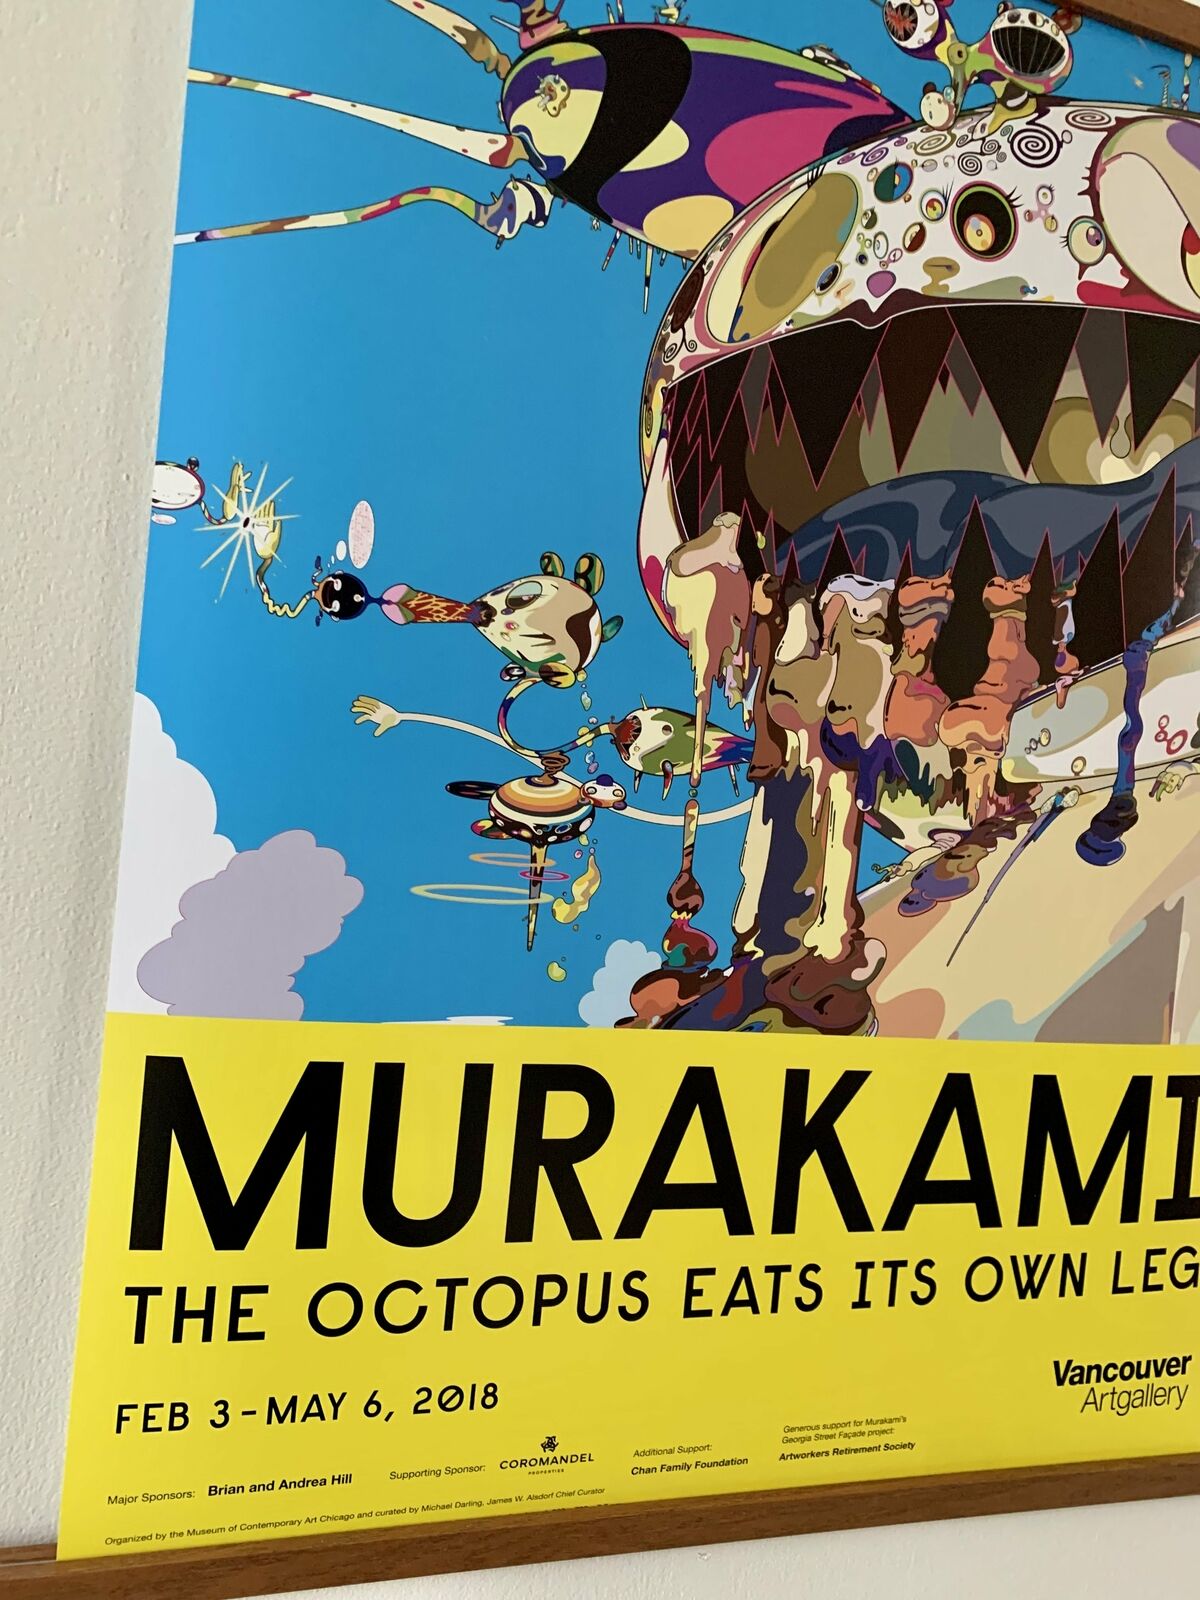 Takashi Murakami original exhibition poster from a Canadian Show in 2018